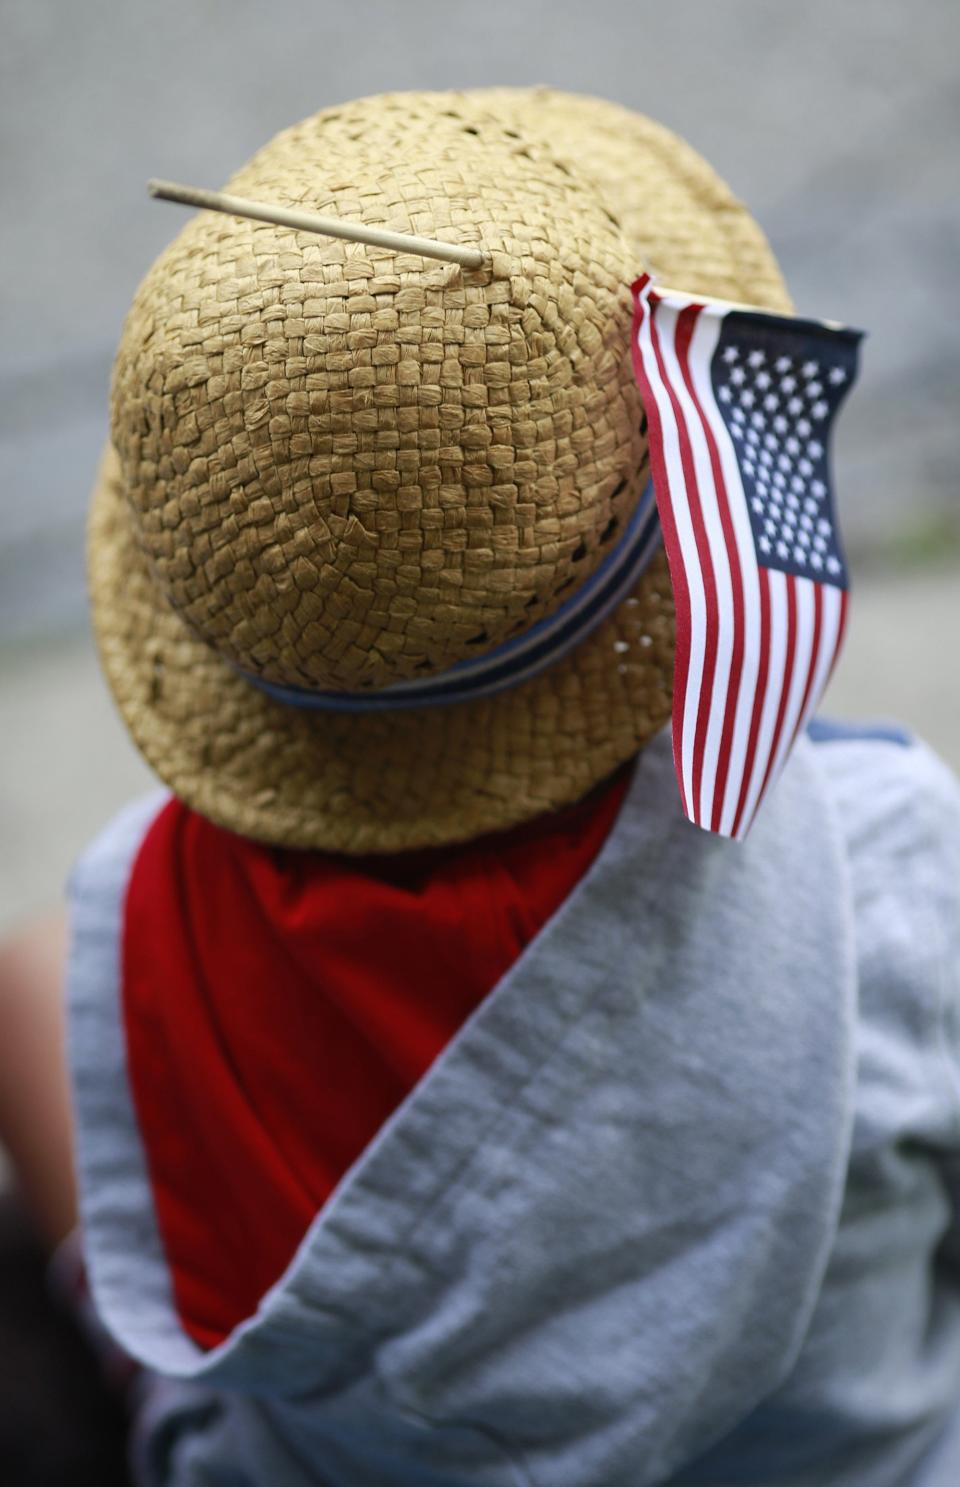 A young onlooker tucked a flag into his hat for the 2019 Upper Arlington Fourth of July parade.